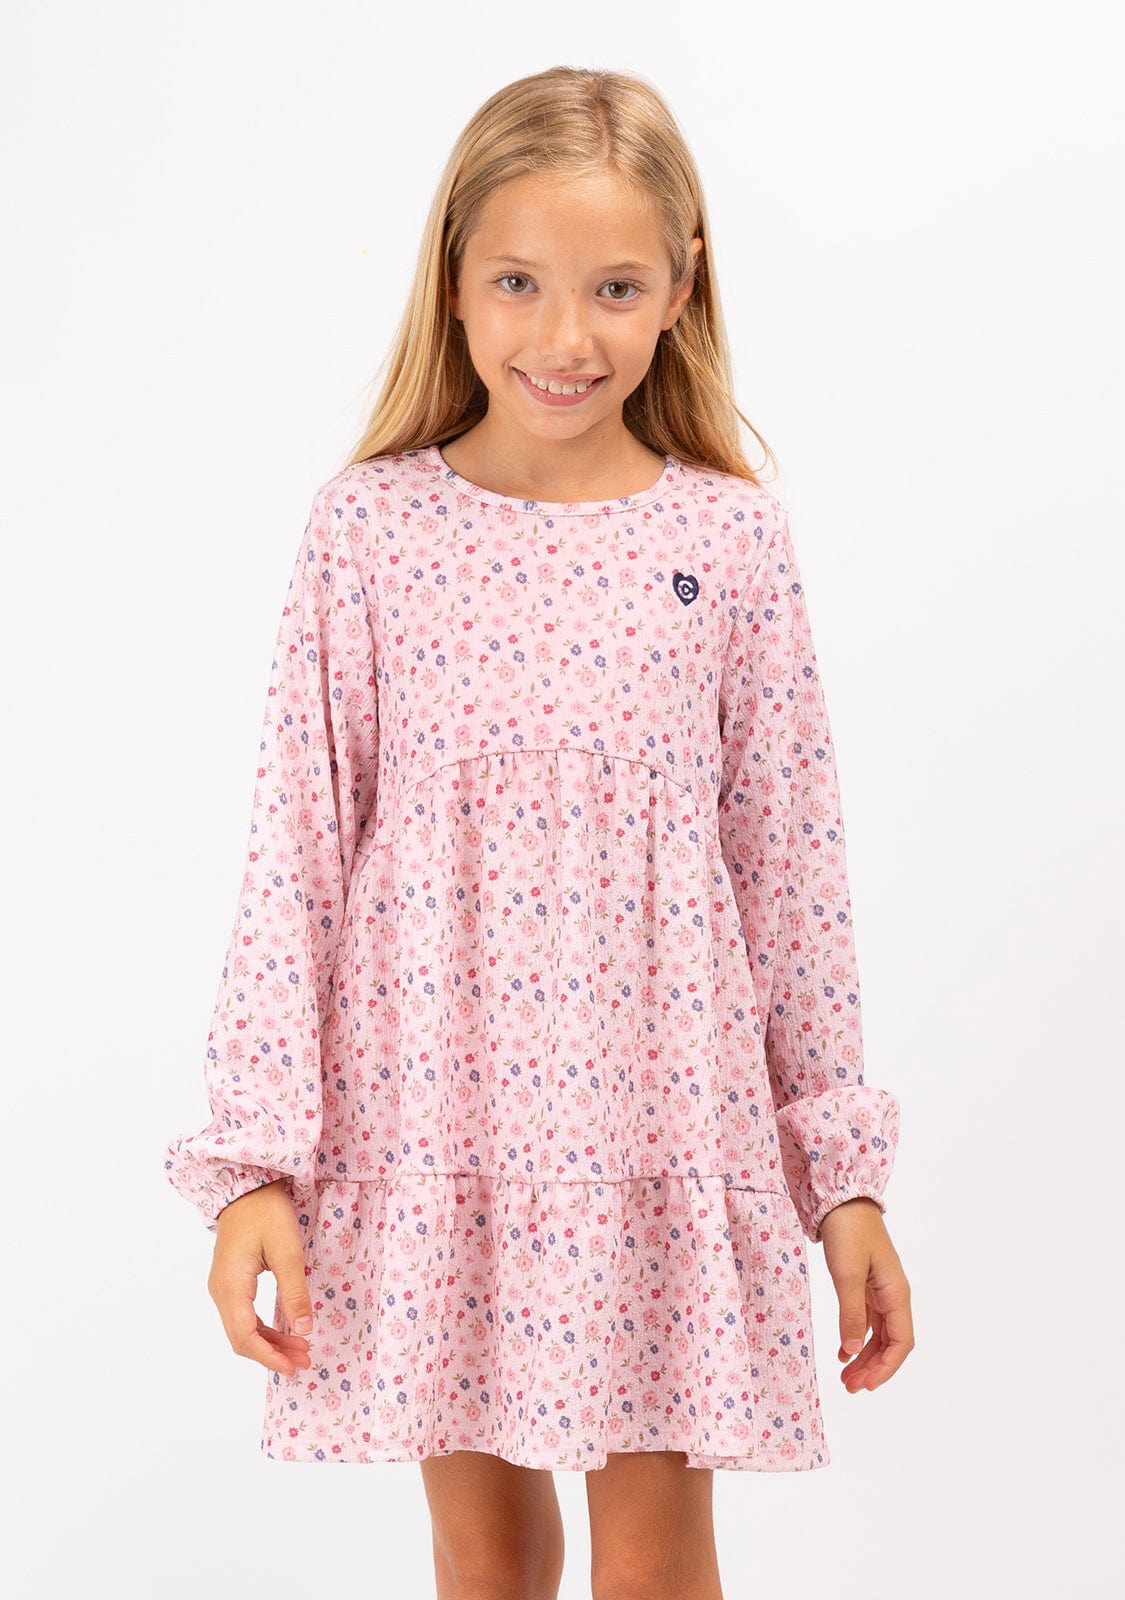 CONGUITOS TEXTIL Clothing Girl's Pink Print Flowers Dress